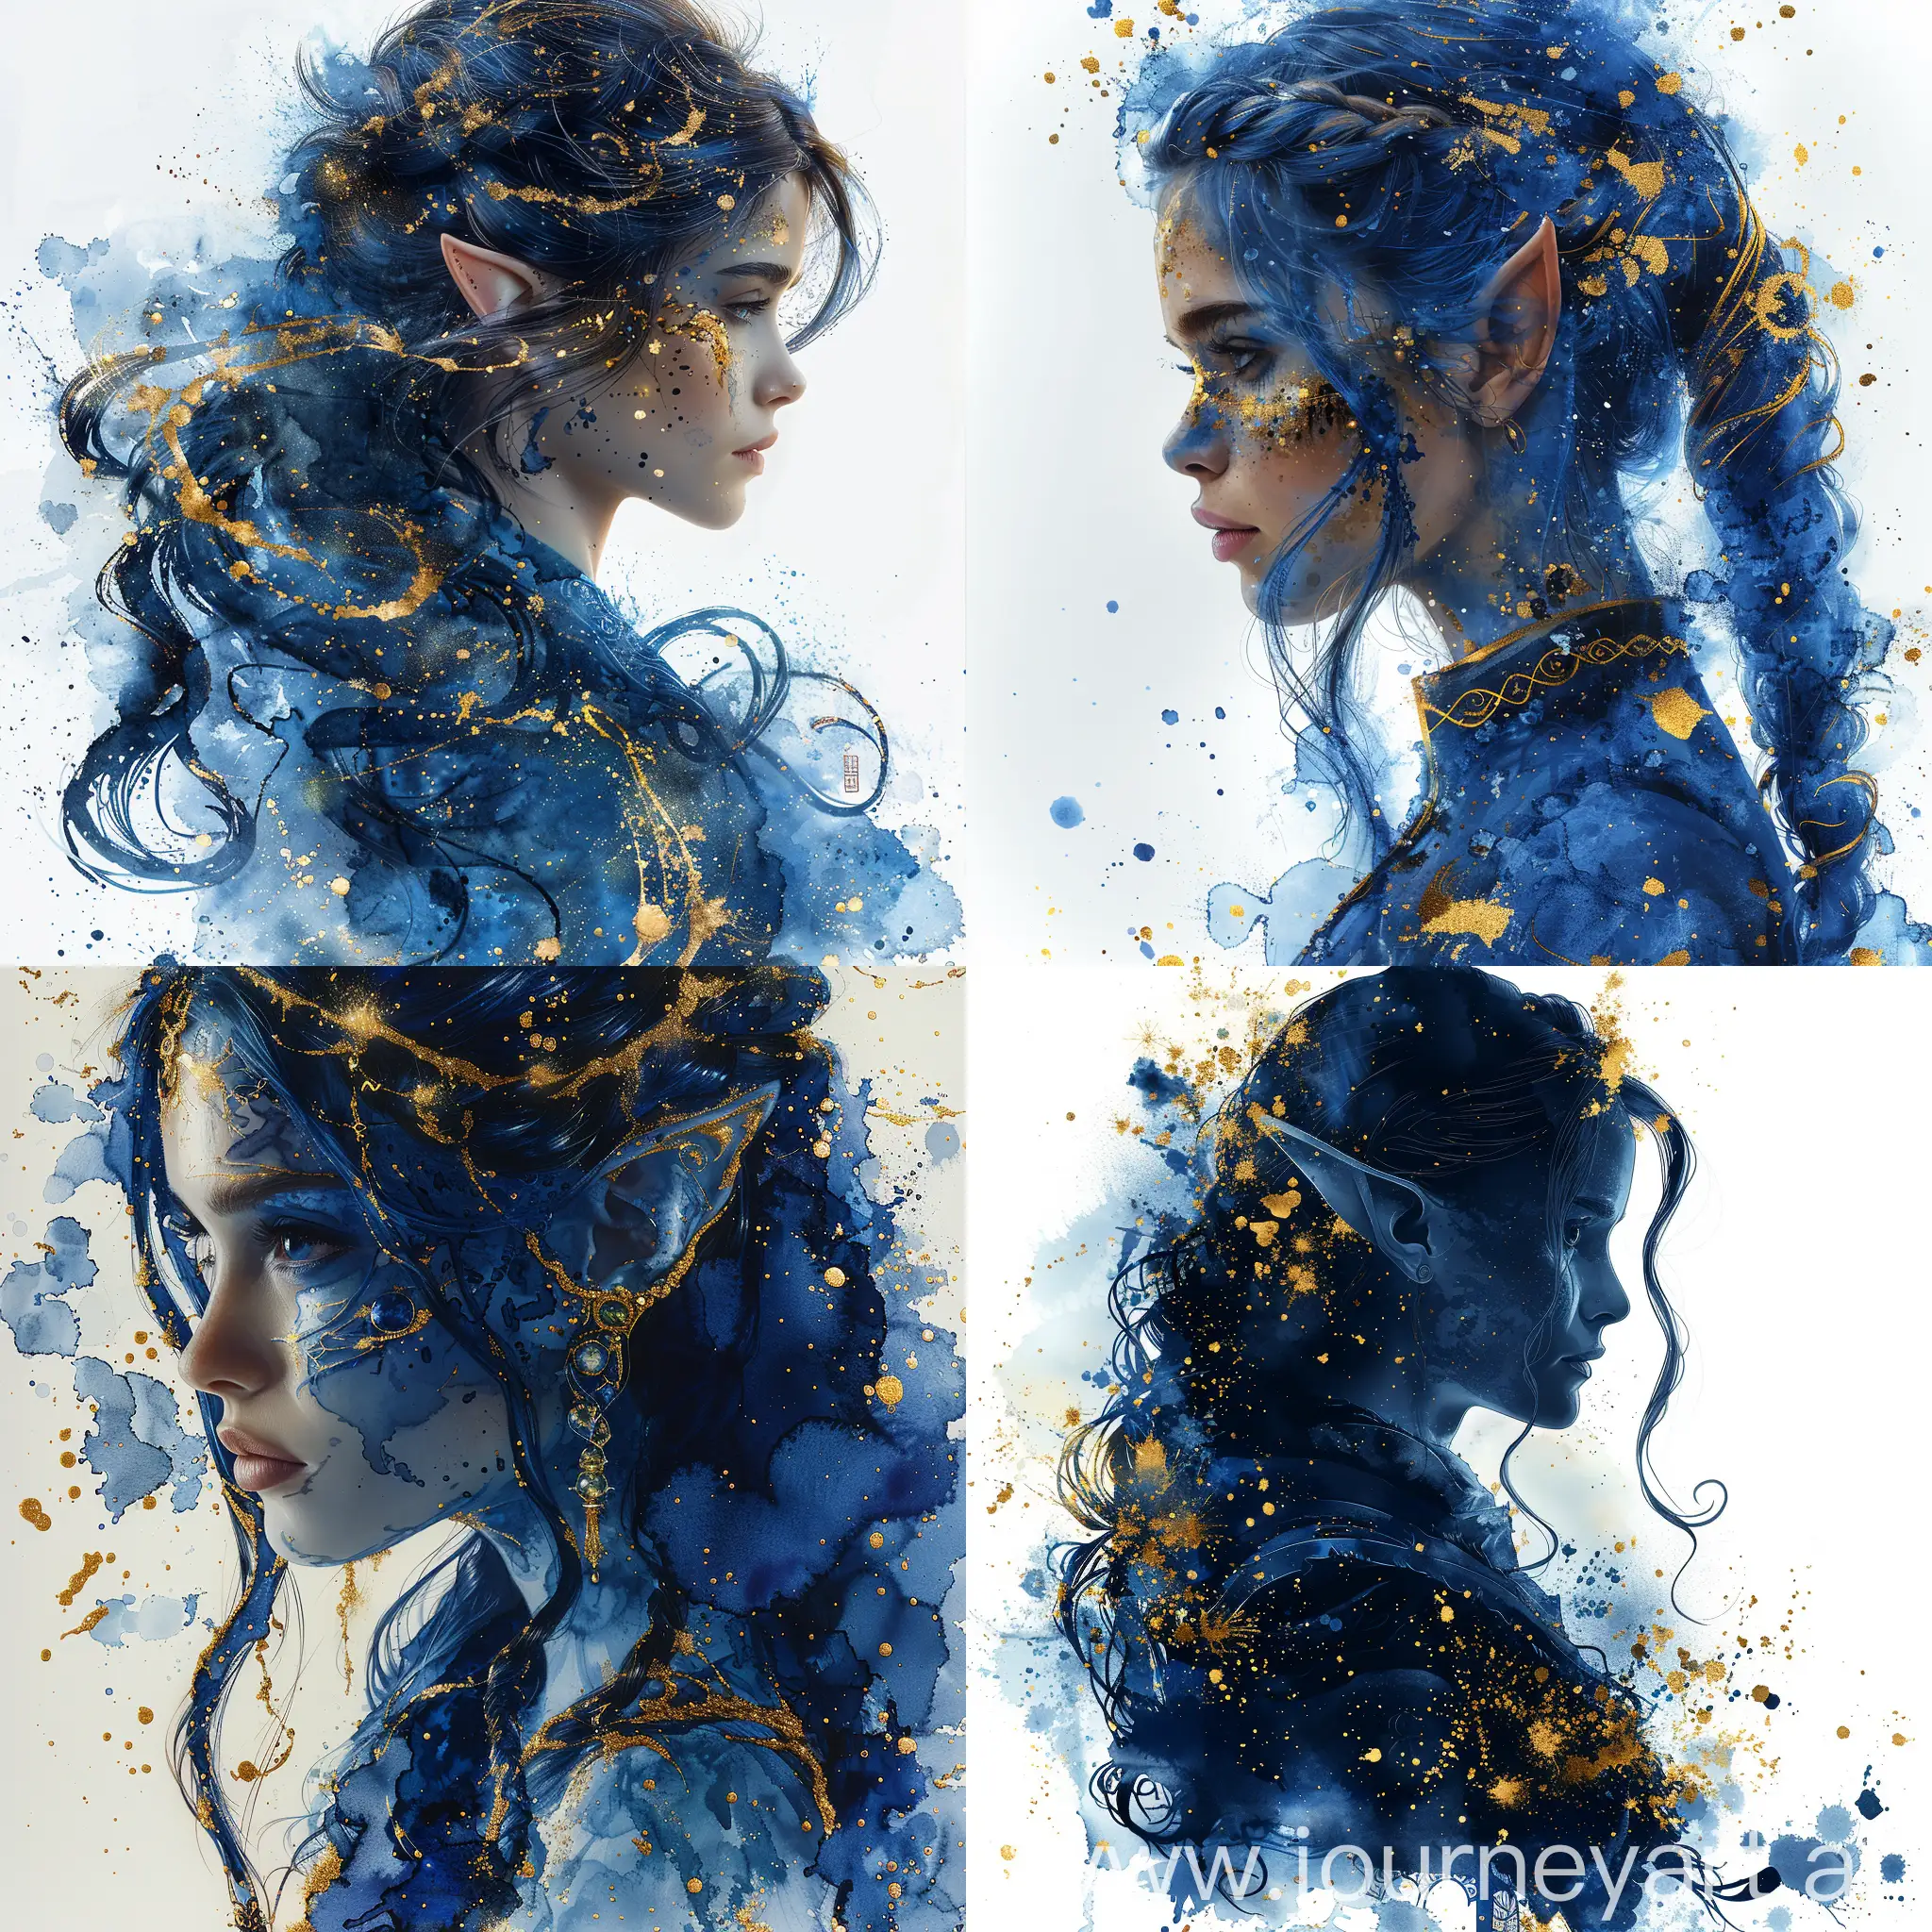 Beautiful-Blue-and-Gold-Cosplaying-Elf-Woman-in-Detailed-Watercolor-Splash-Art